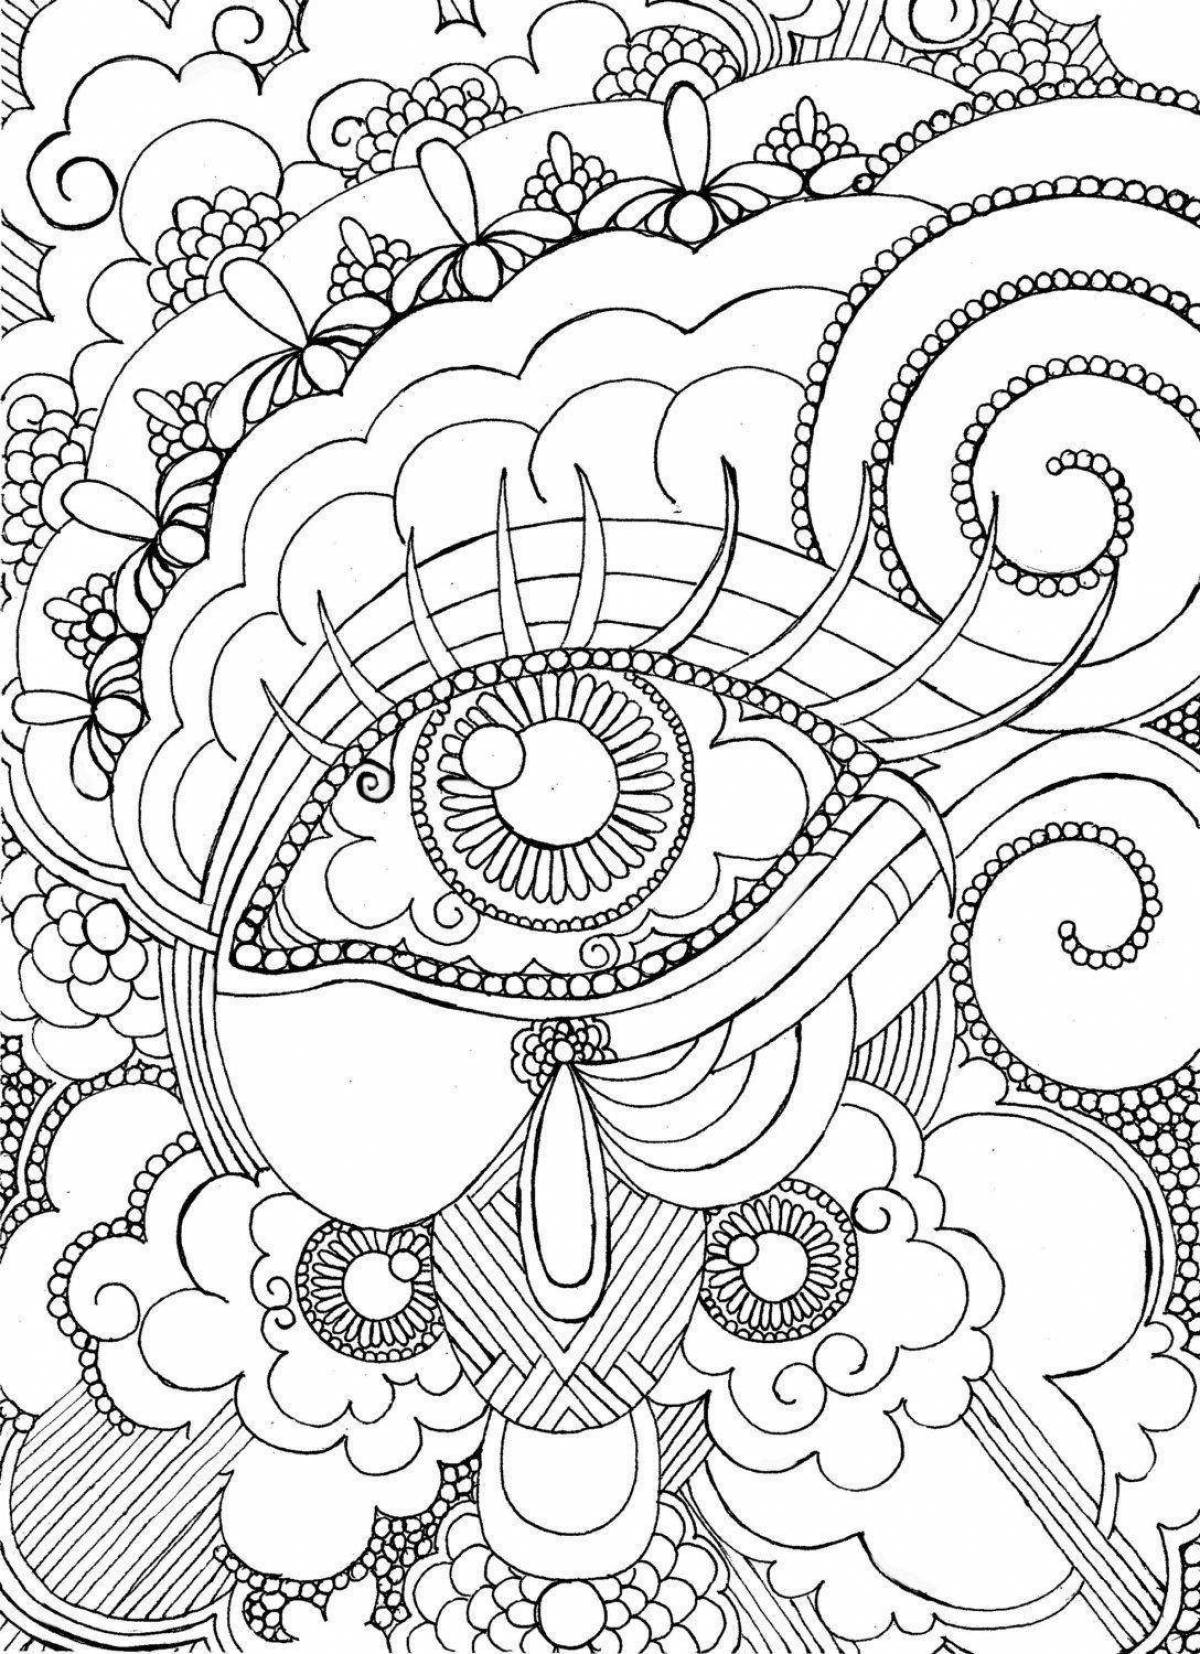 Decorated coloring pages for adults